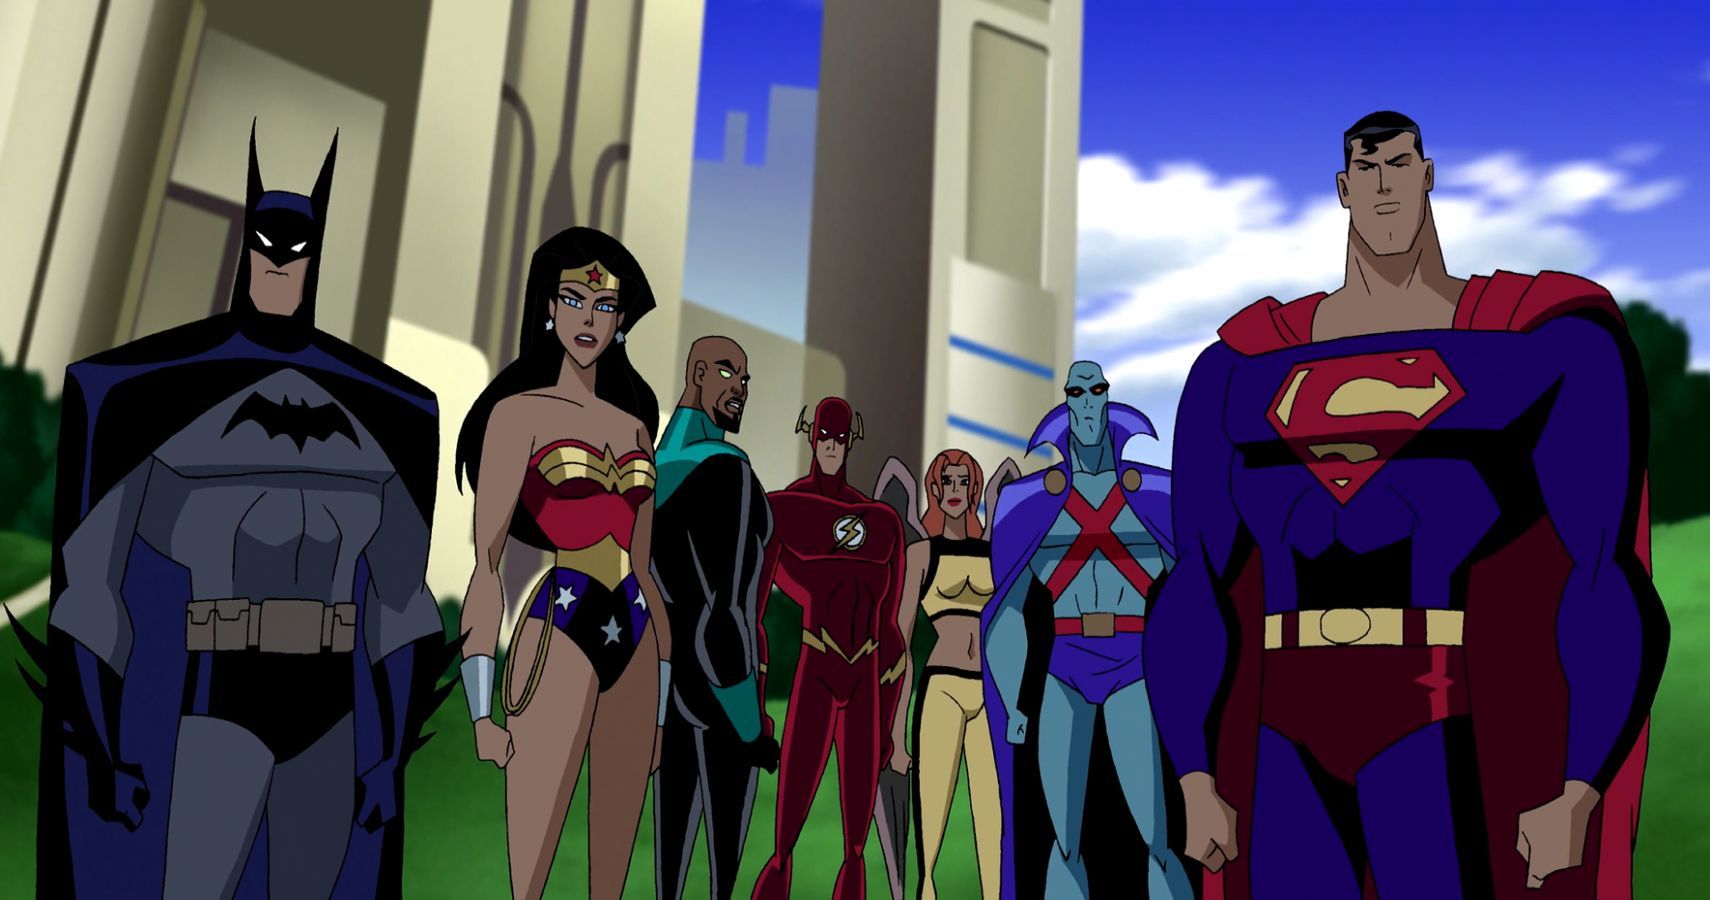 The cast of the animated Justice League